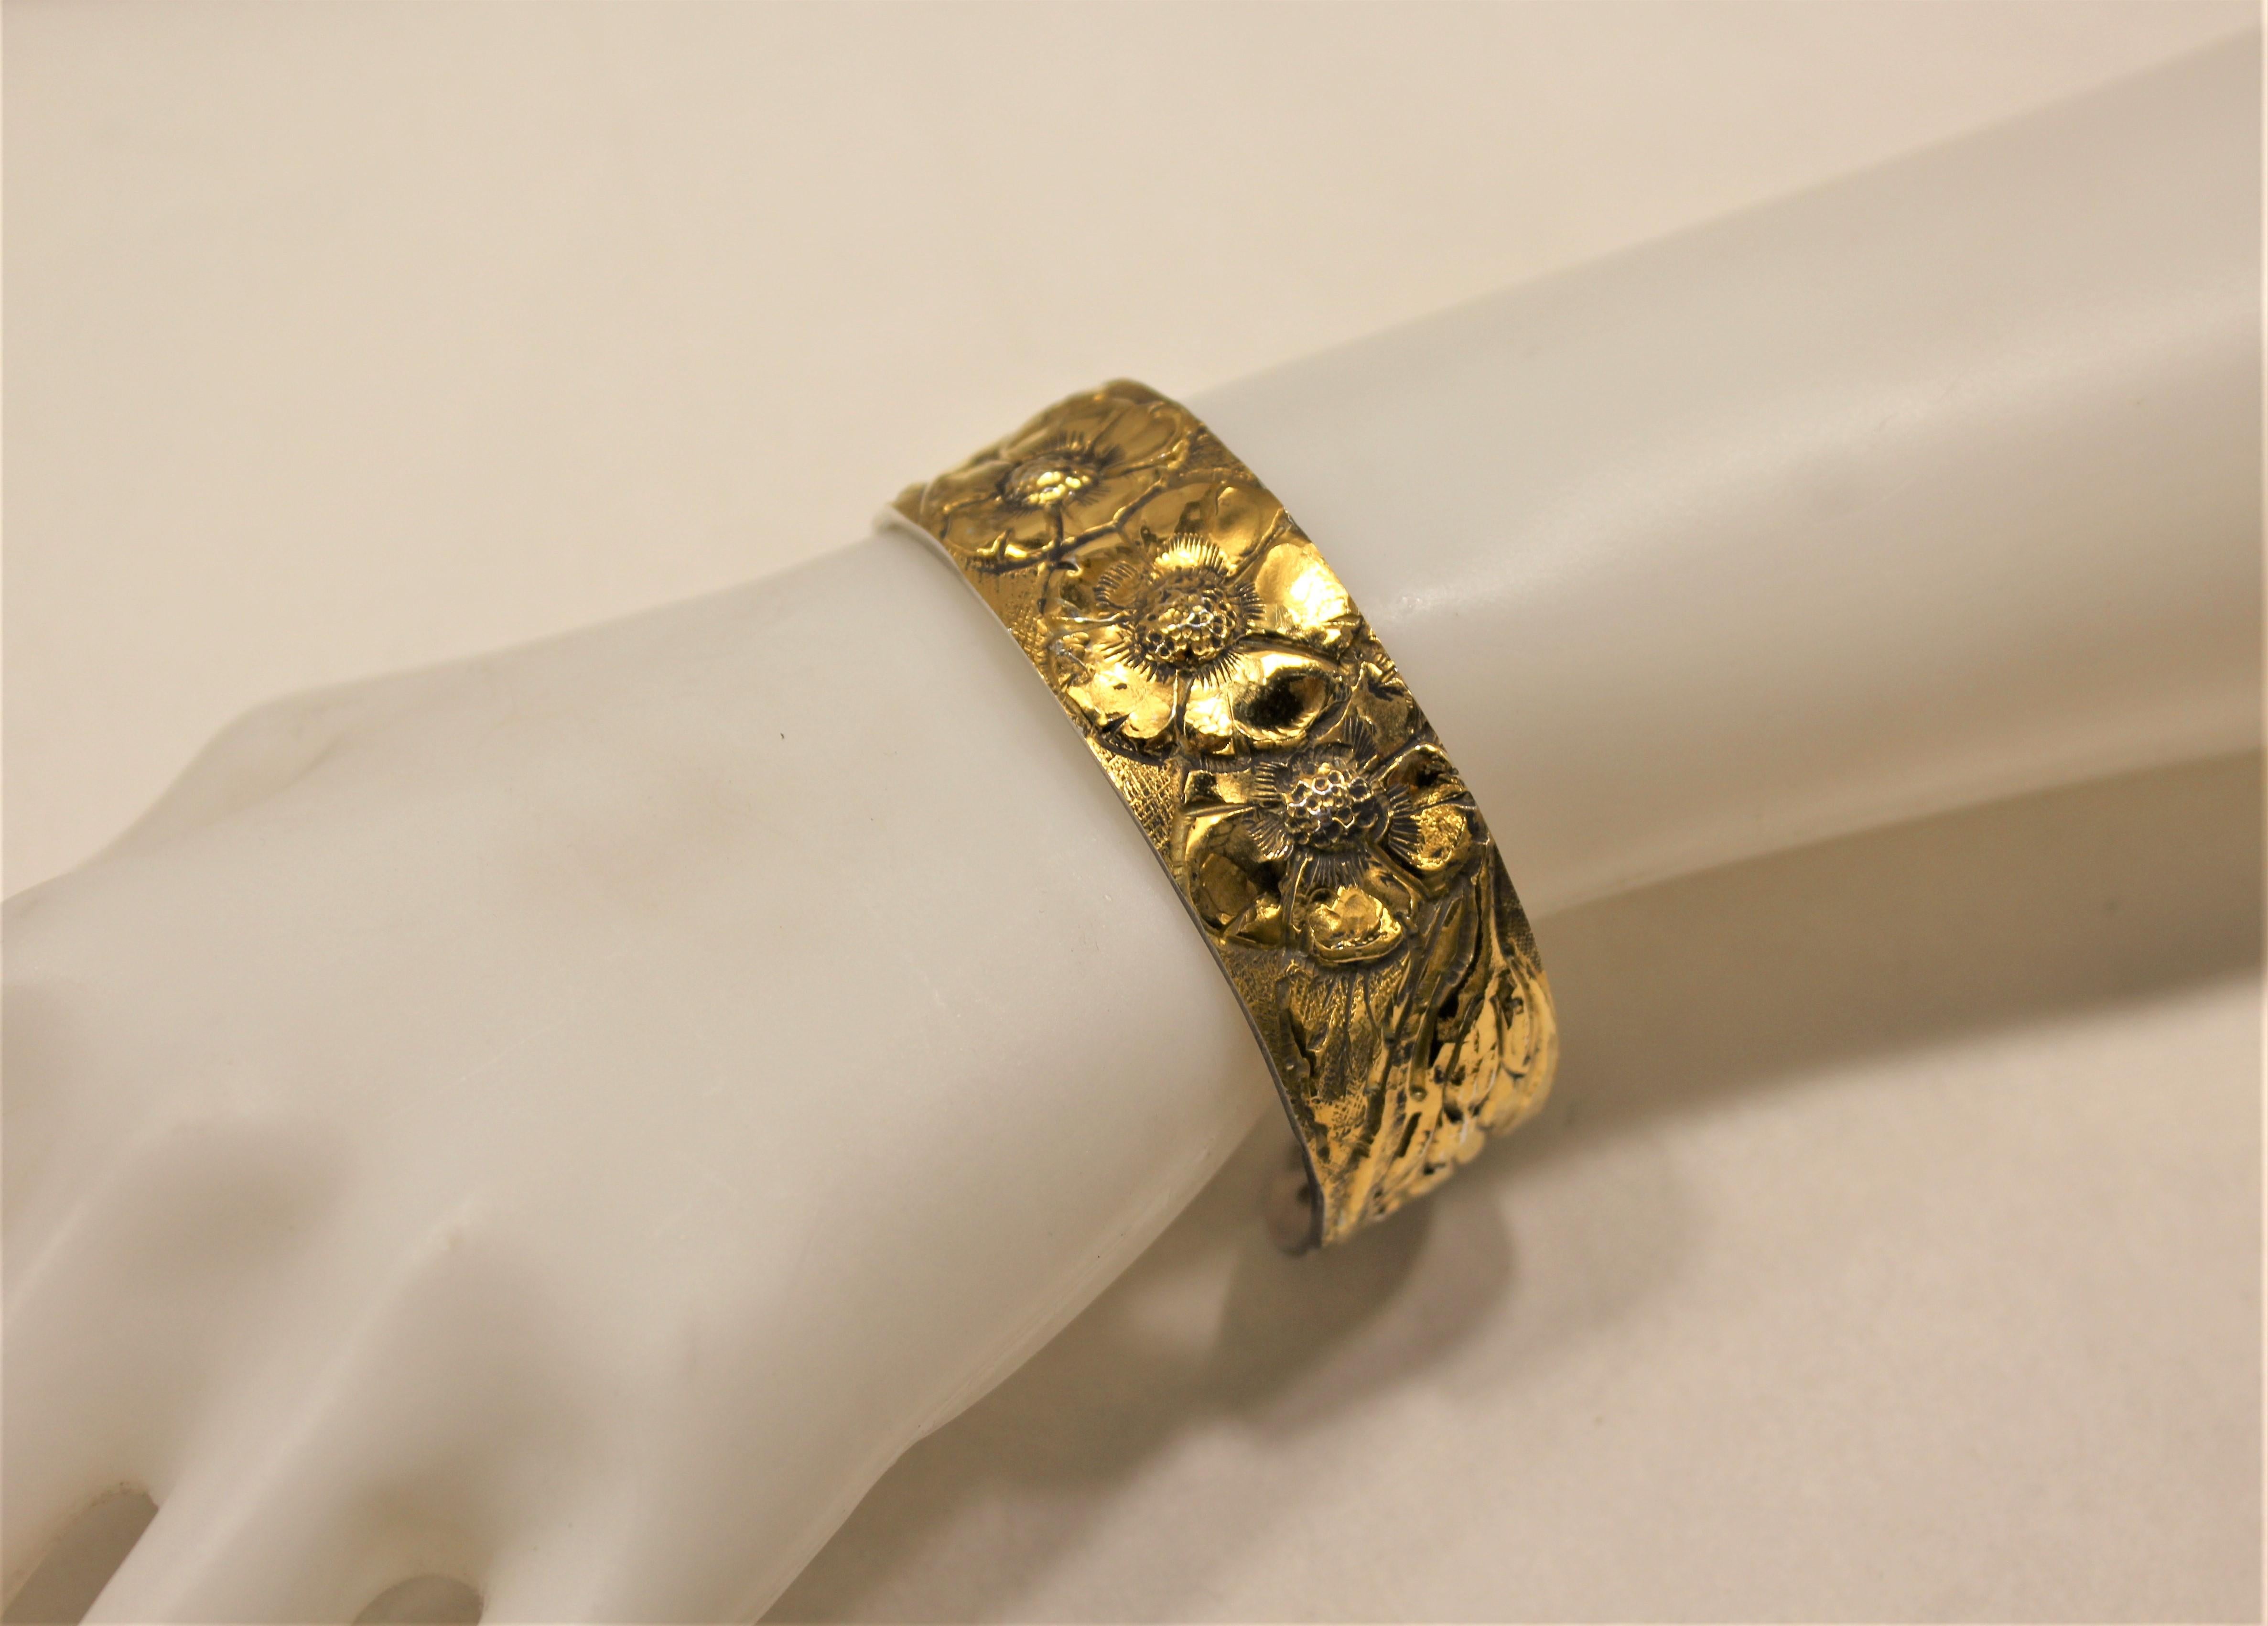 Cuff Bracelet, Pomegranate, 24 Karat Gold, Solid Silver, Handcrafted, Italy In New Condition For Sale In Firenze, IT